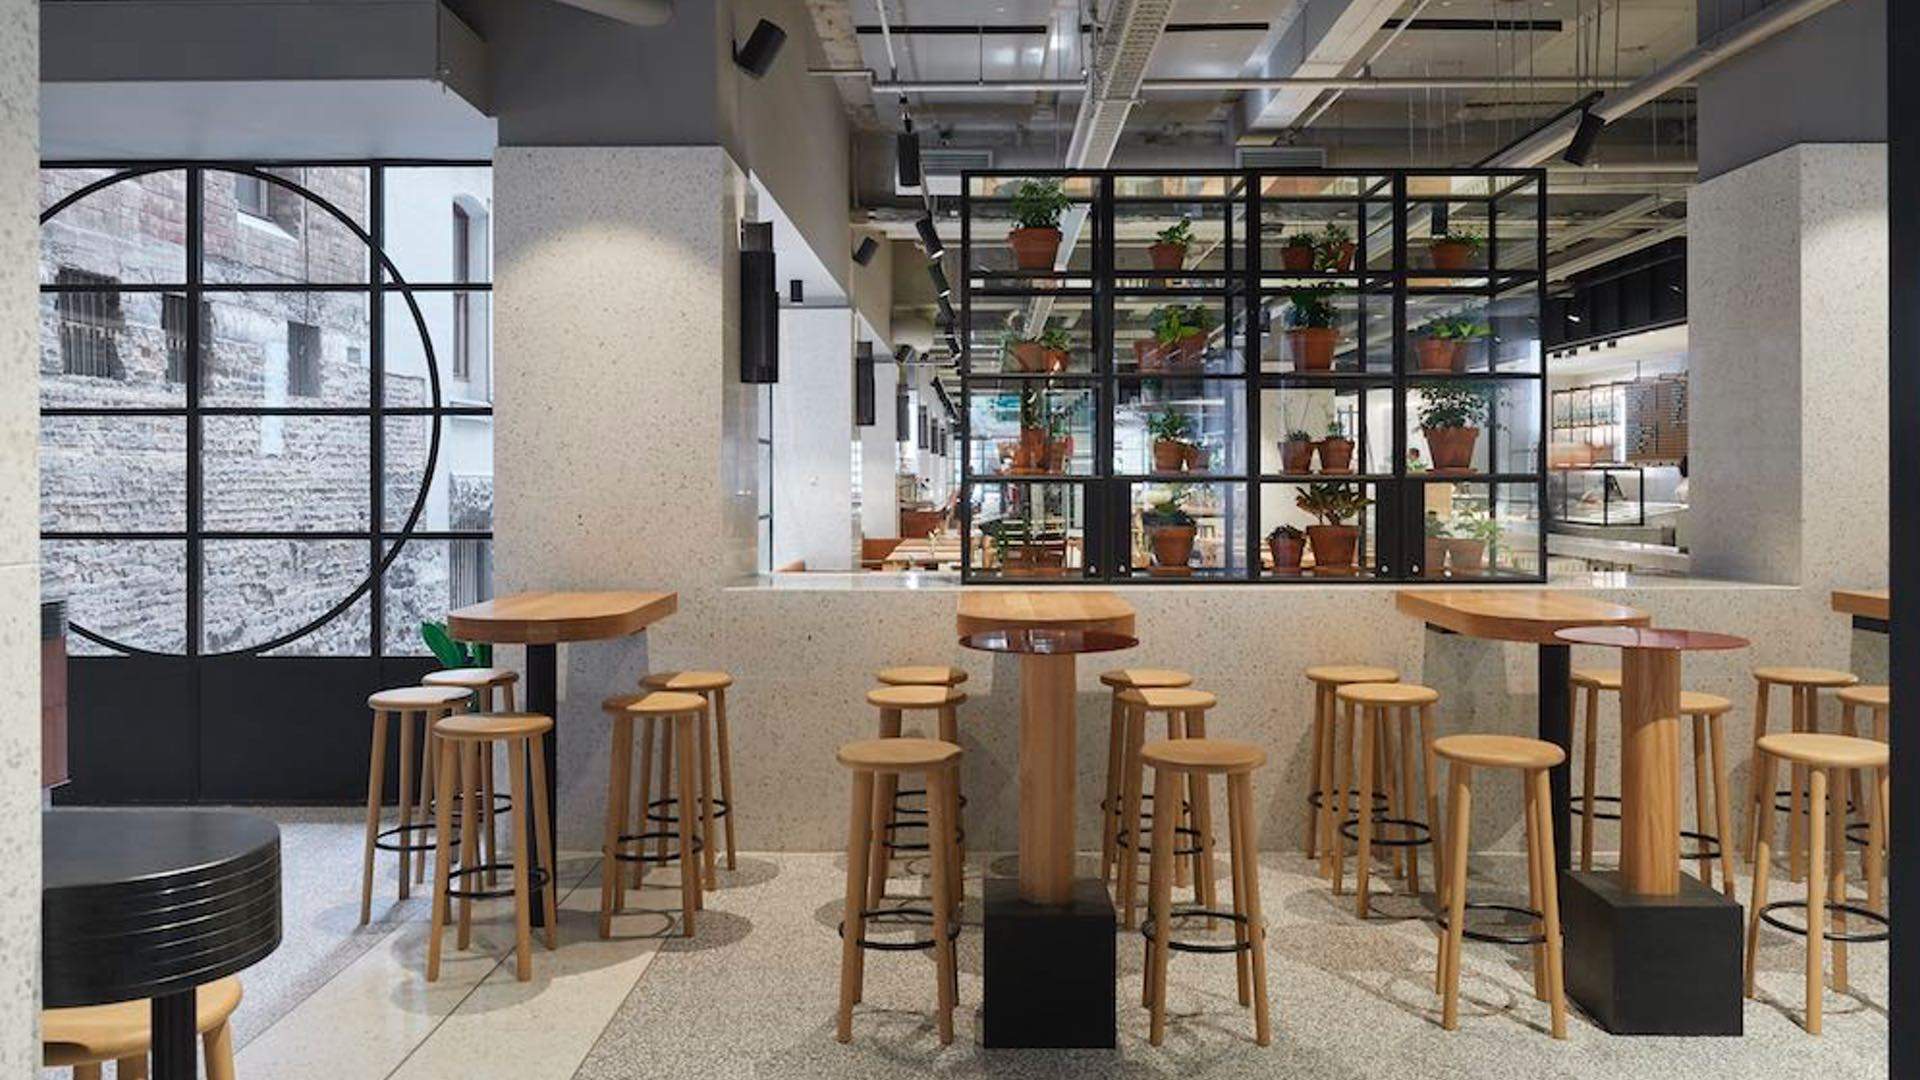 Melbourne's Brunetti Enters a Fresh Era with New Contemporary 300-Seat CBD Cafe